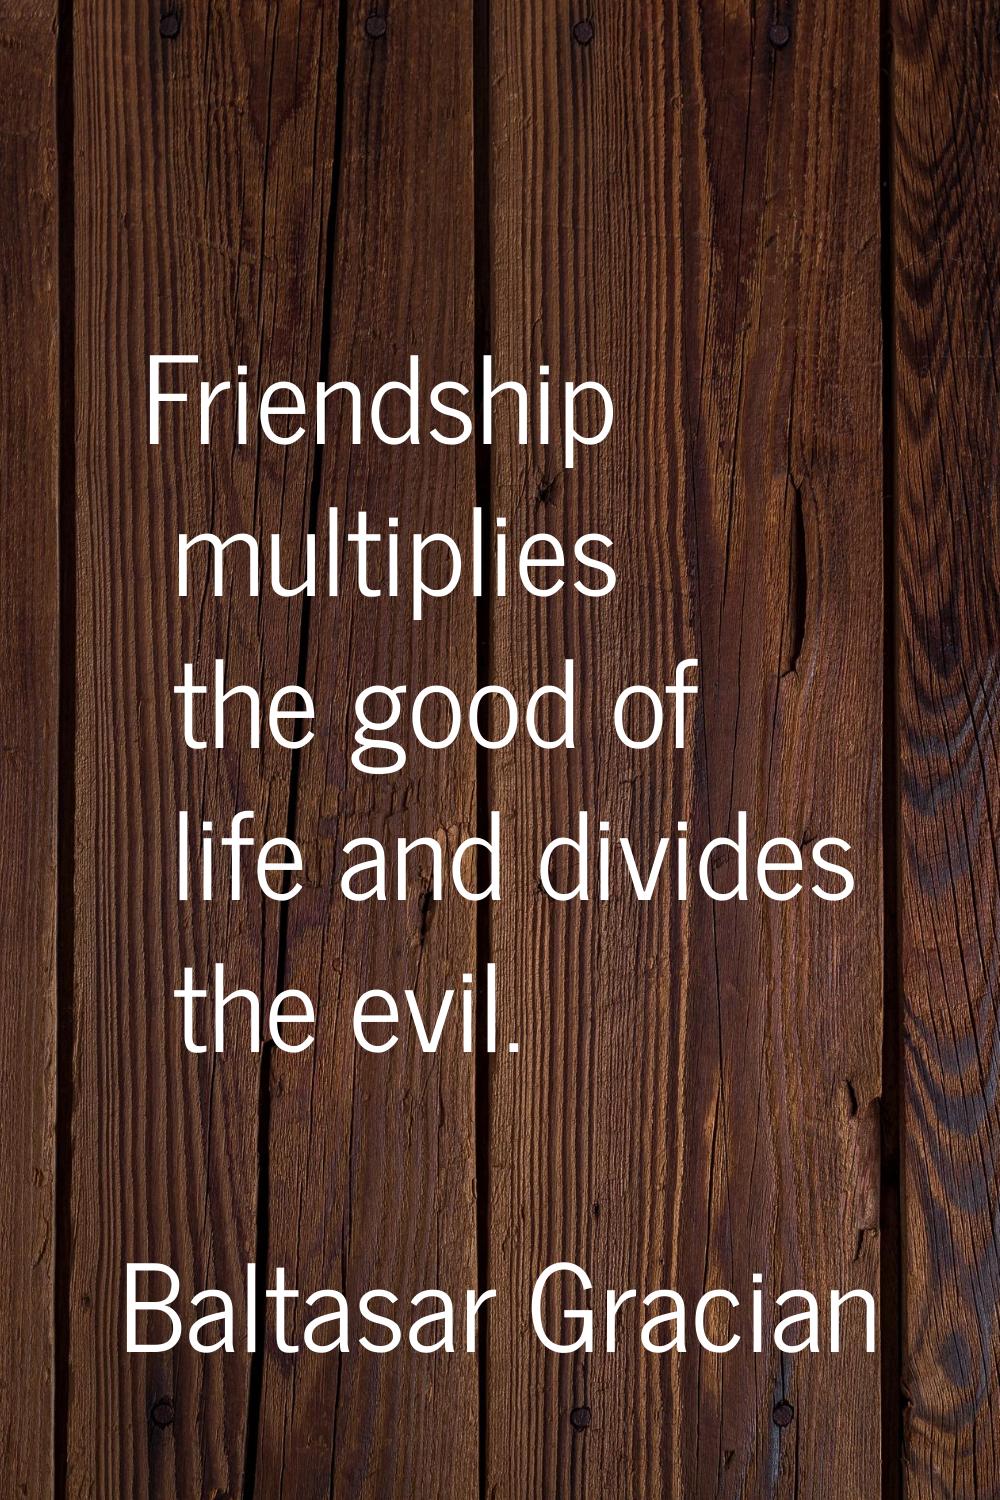 Friendship multiplies the good of life and divides the evil.